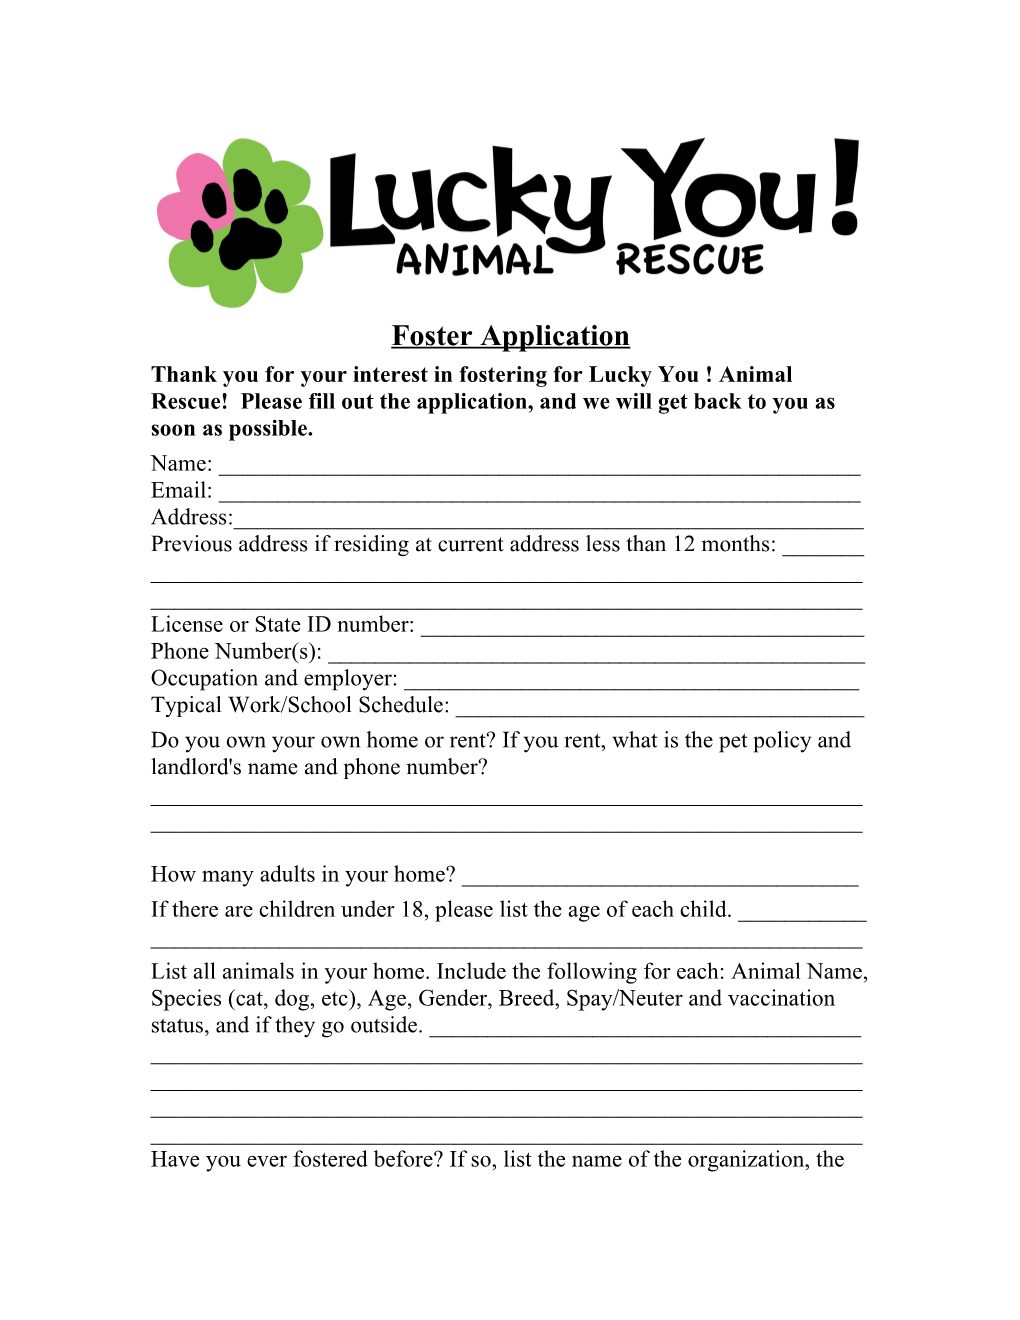 Thank You for Your Interest in Fostering for Lucky You ! Animal Rescue! Please Fill Out